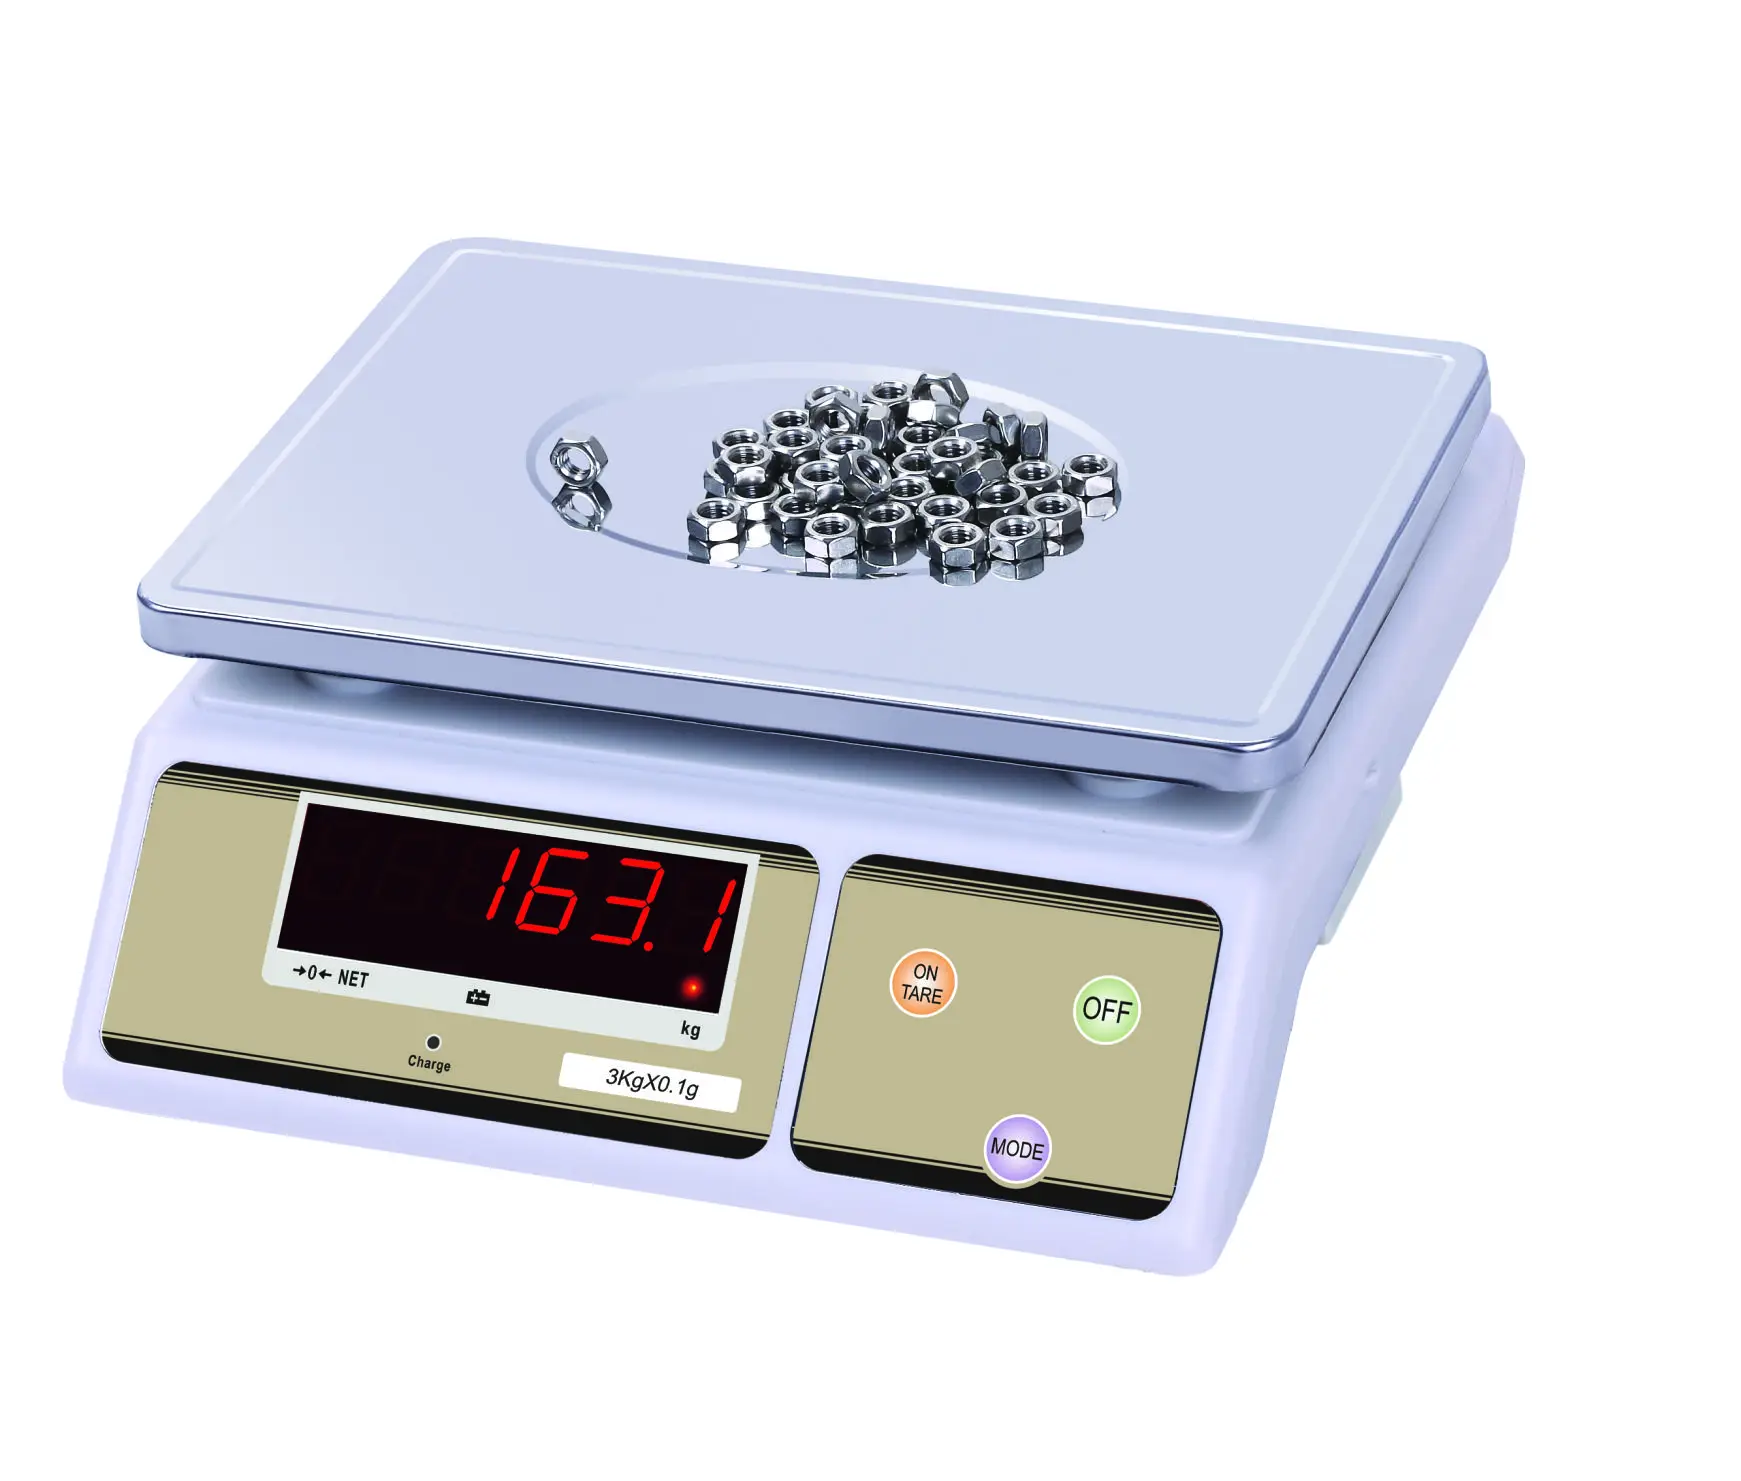 Digital Weighing  Scale kitchen scale3Kg 0.1g 6Kg0.2g 15Kg0.5g 30kg1gFood Scales Digital Weight Gram and Oz Scale with LCD/ Tare mini high precision digital kitchen scale portable scale jewelry gold balance weight gram lcd pocket weighting electronic scales